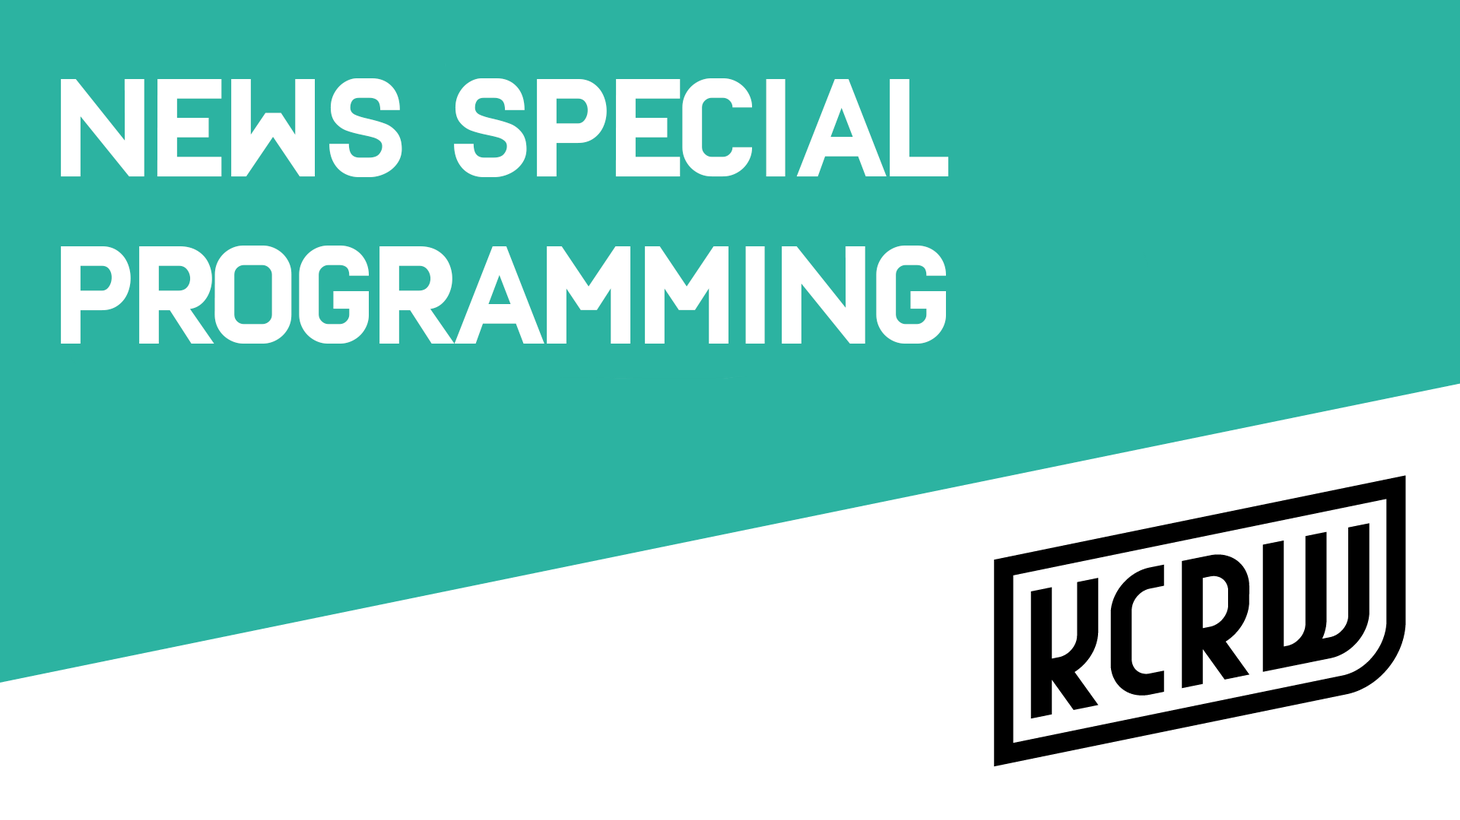 A live, one-hour special brought to you by KQED and KCRW.